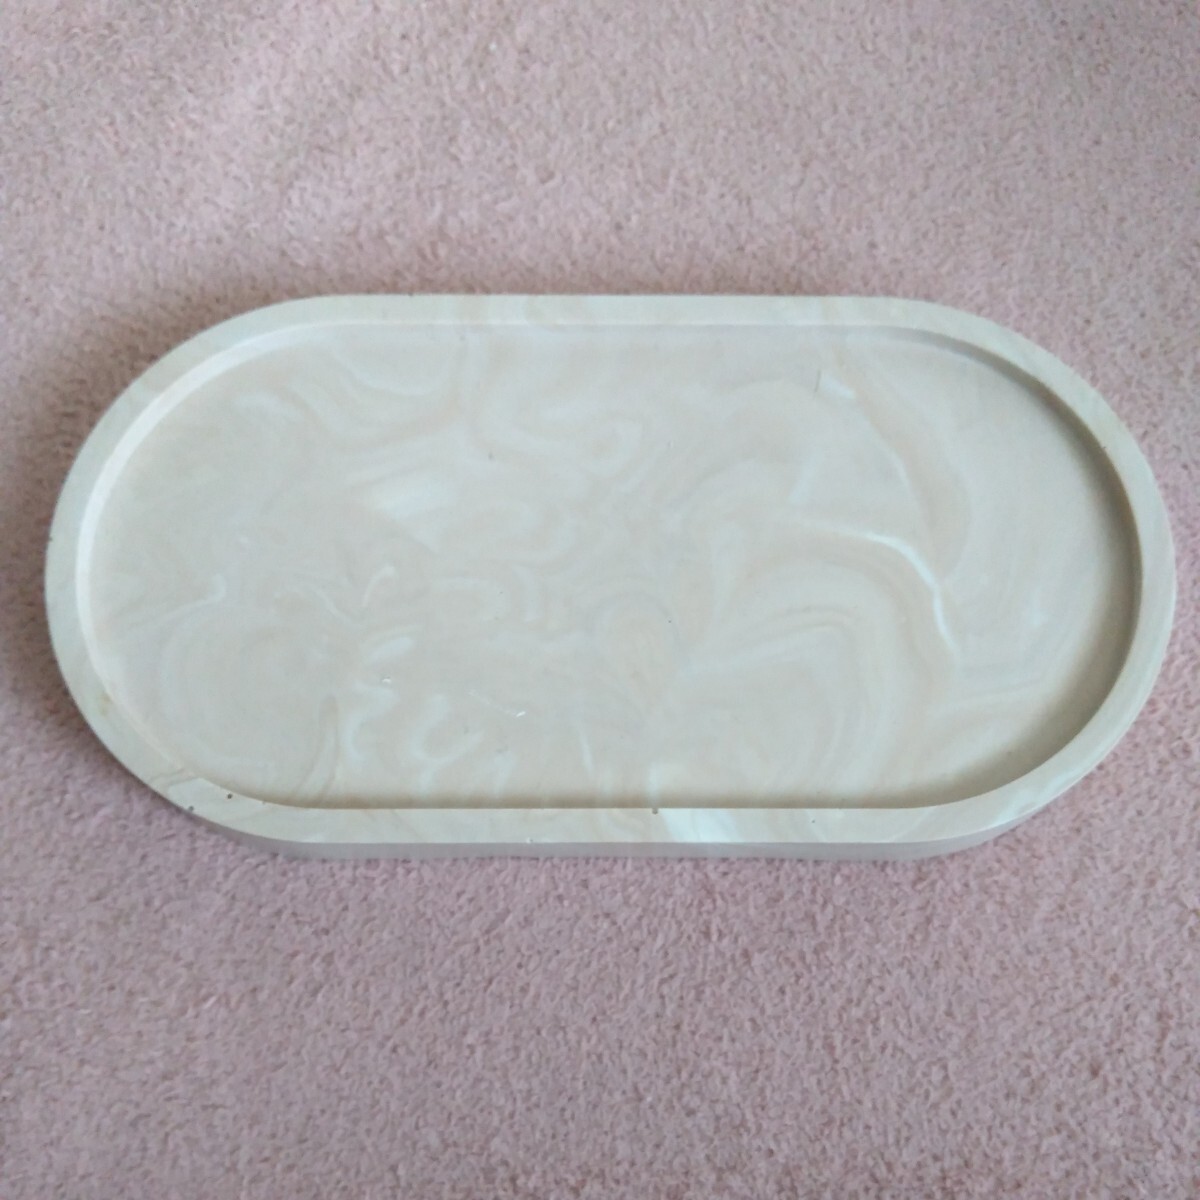  plate tray marble pattern 